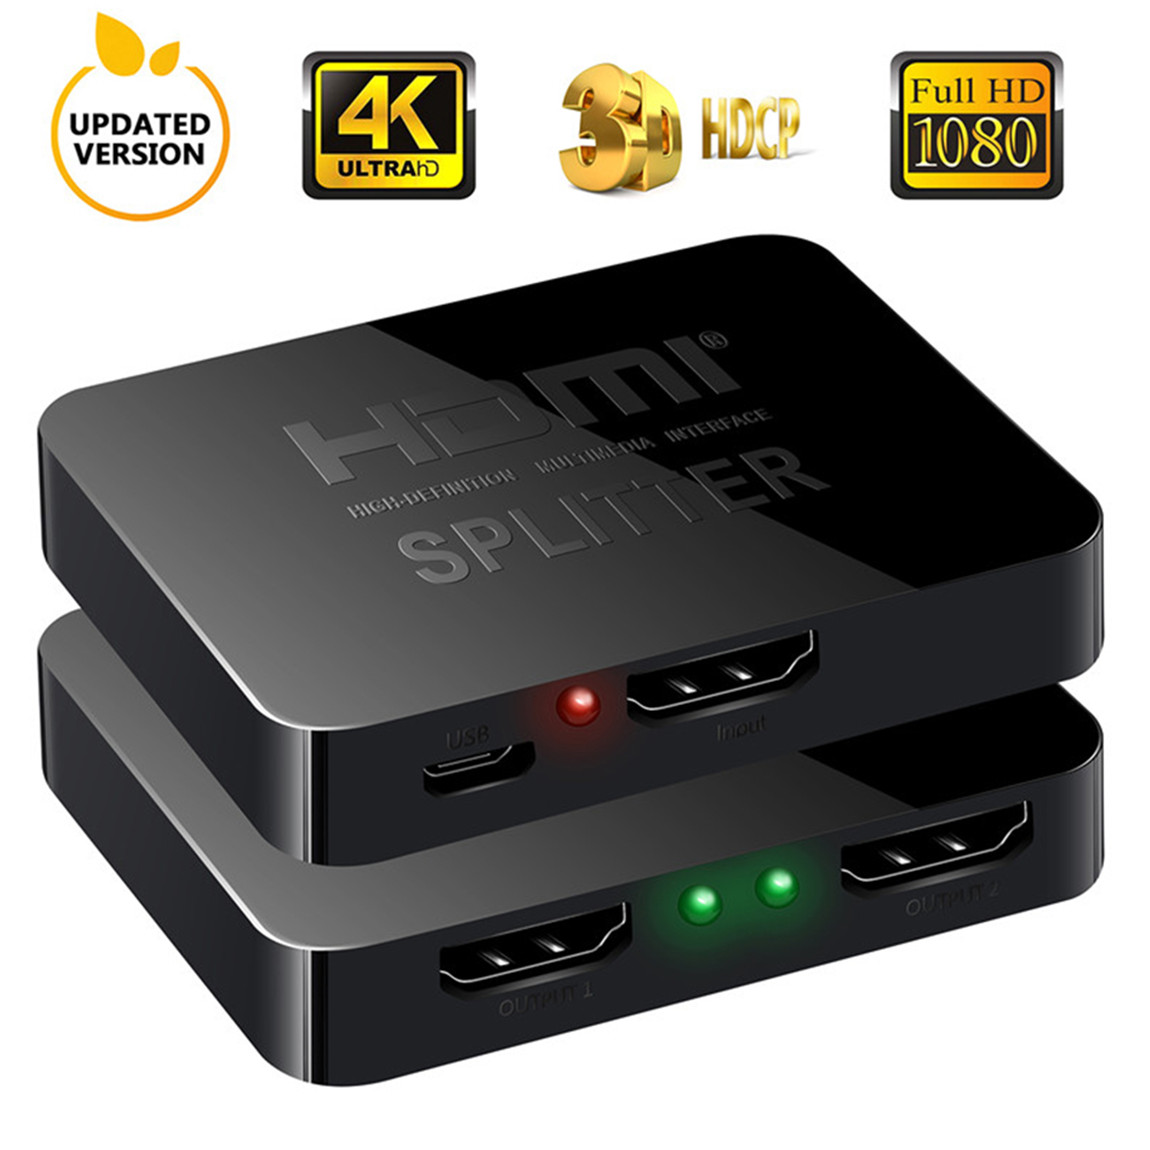 Tilfældig relæ enkemand HDMI Splitter 1 in 2 Out, 4K HDMI Splitter for Dual Monitors  Duplicate/Mirror Only, 1x2 HDMI Splitter 1 to 2 Amplifier for Full HD 1080P  3D with HDMI Cable (1 Source onto